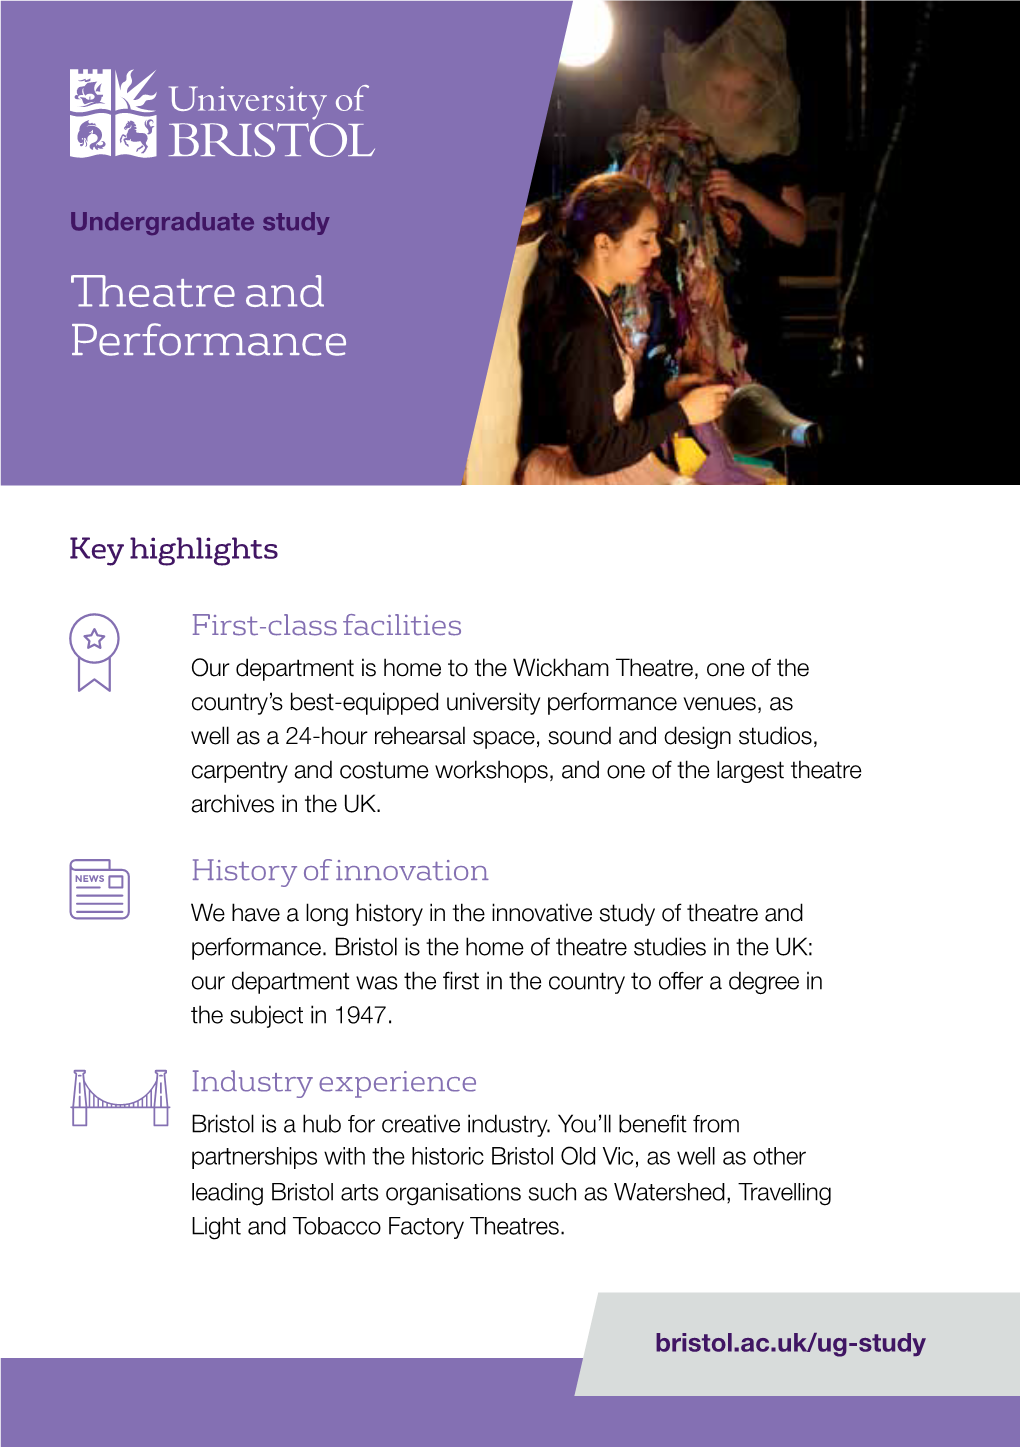 Download the Theatre Leaflet